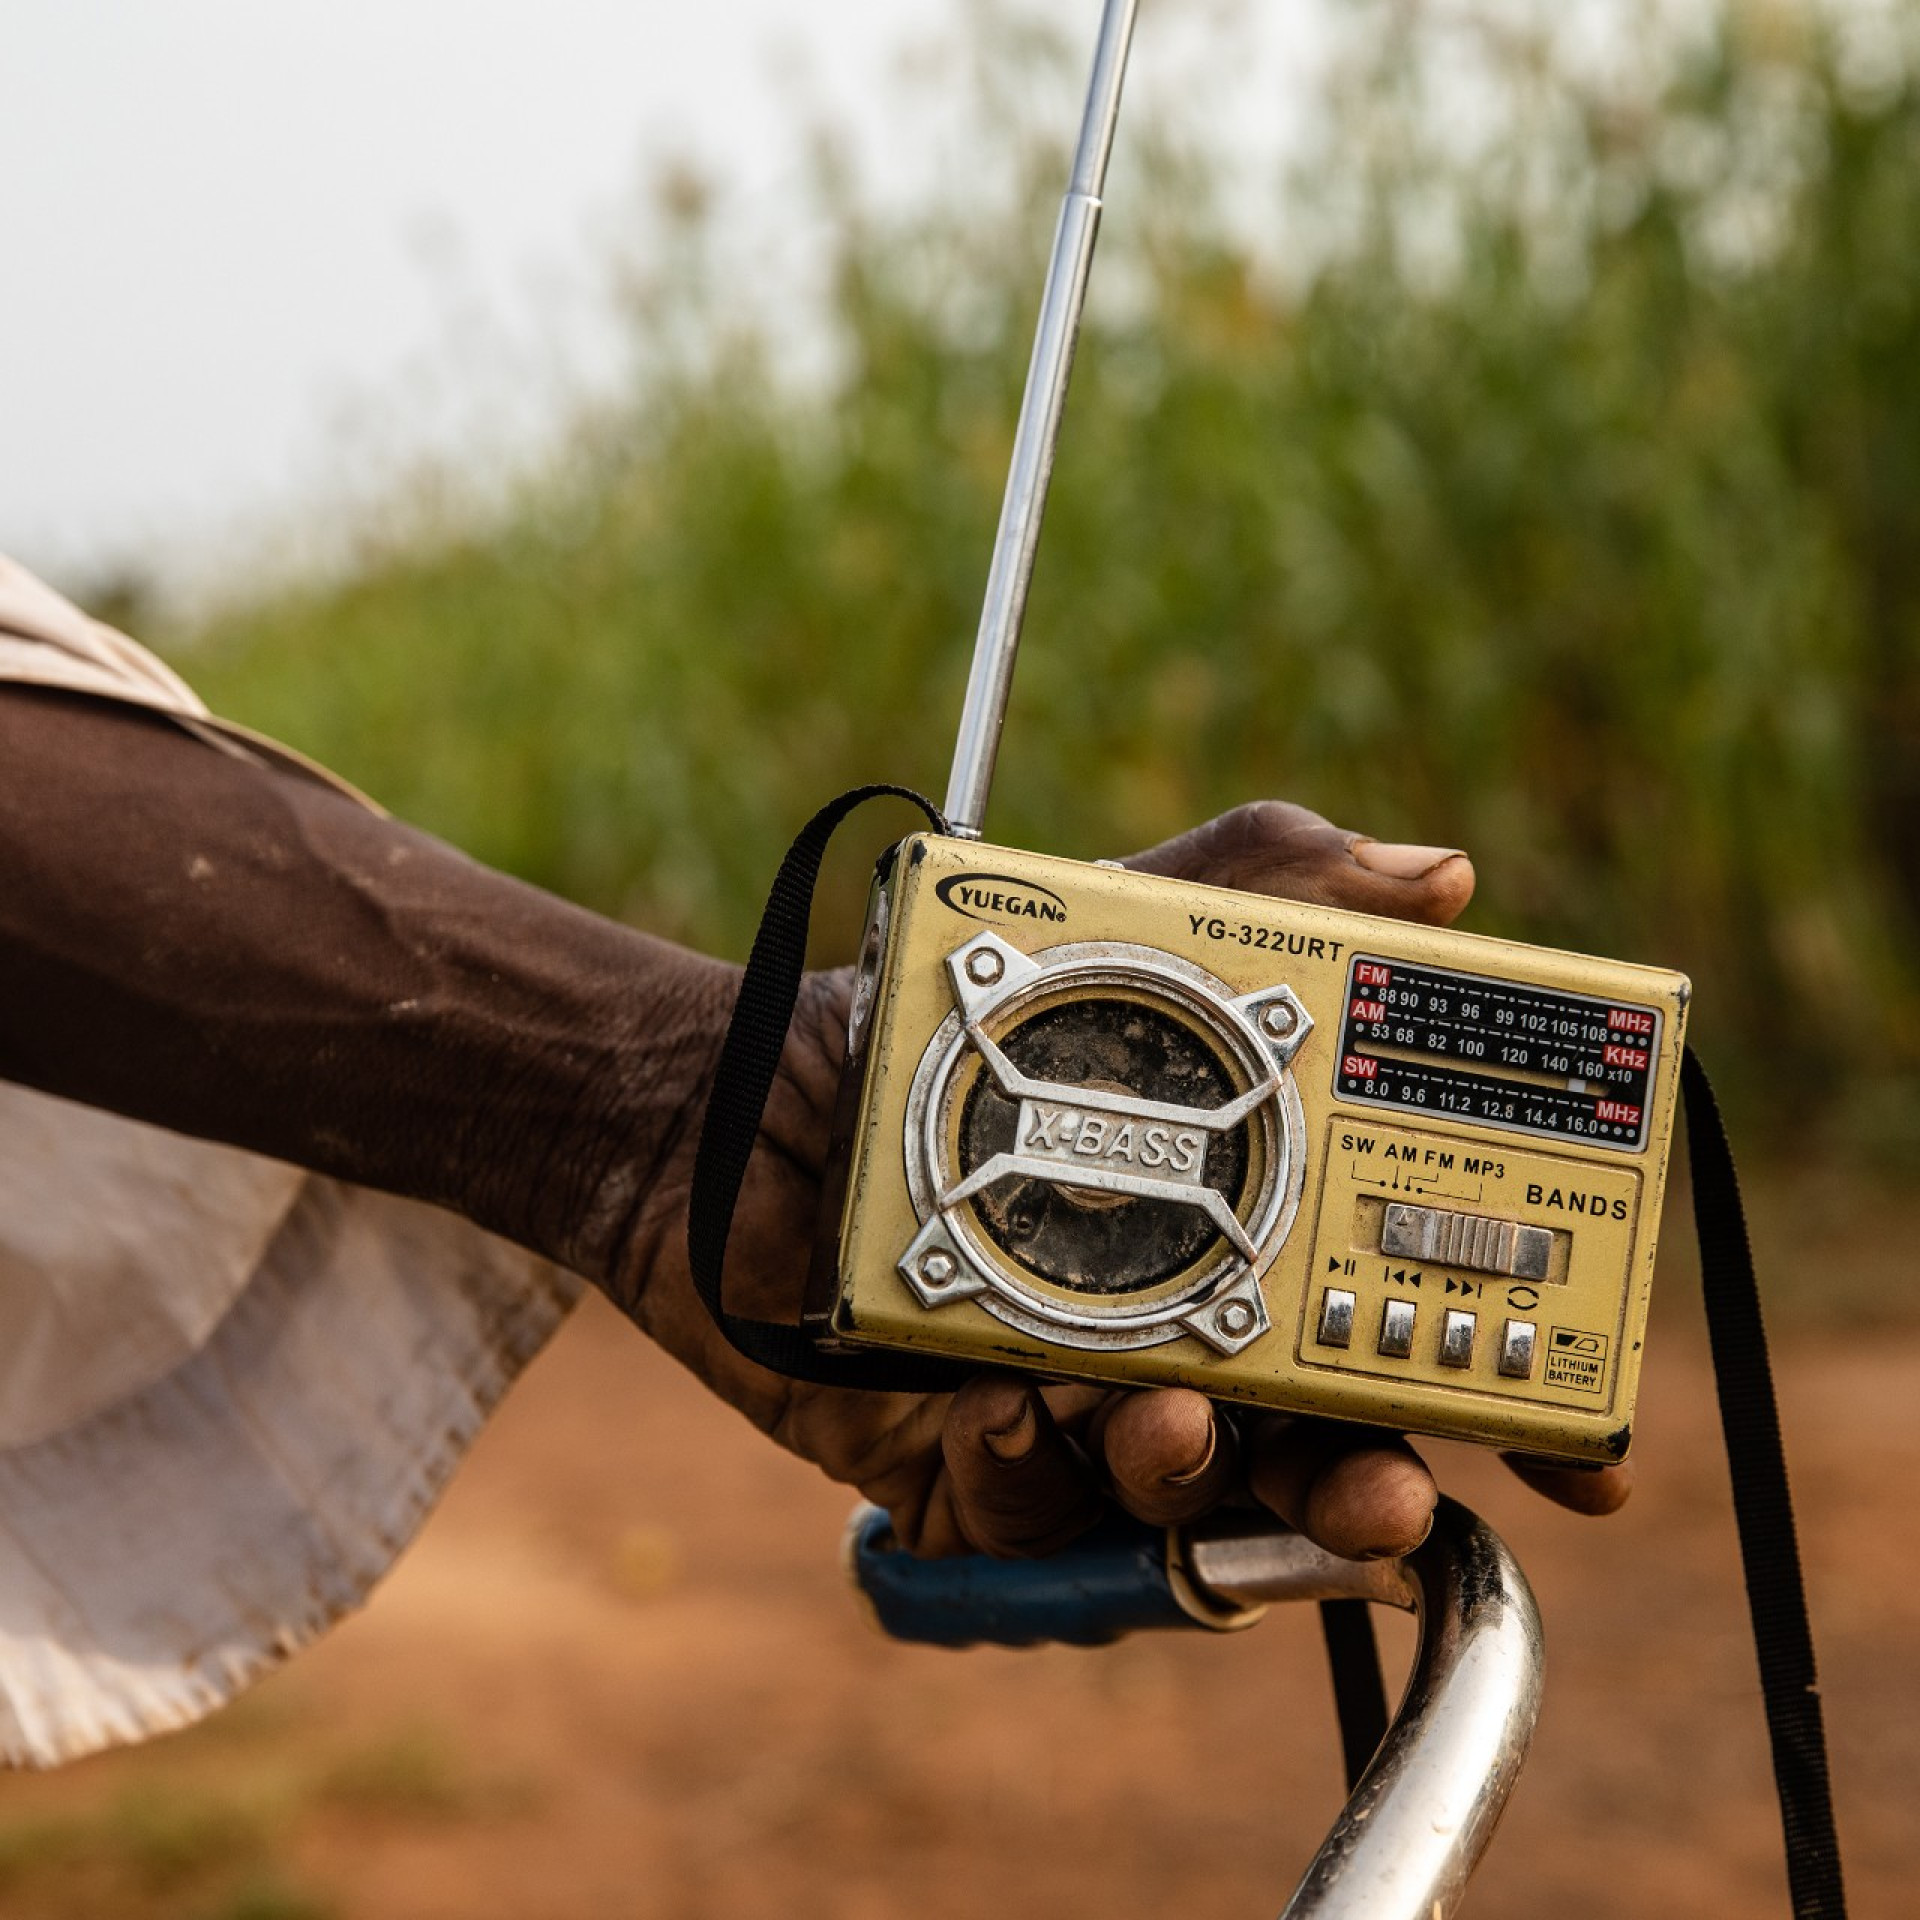 A radio demonstrating the distribution mechanism used in this campaign